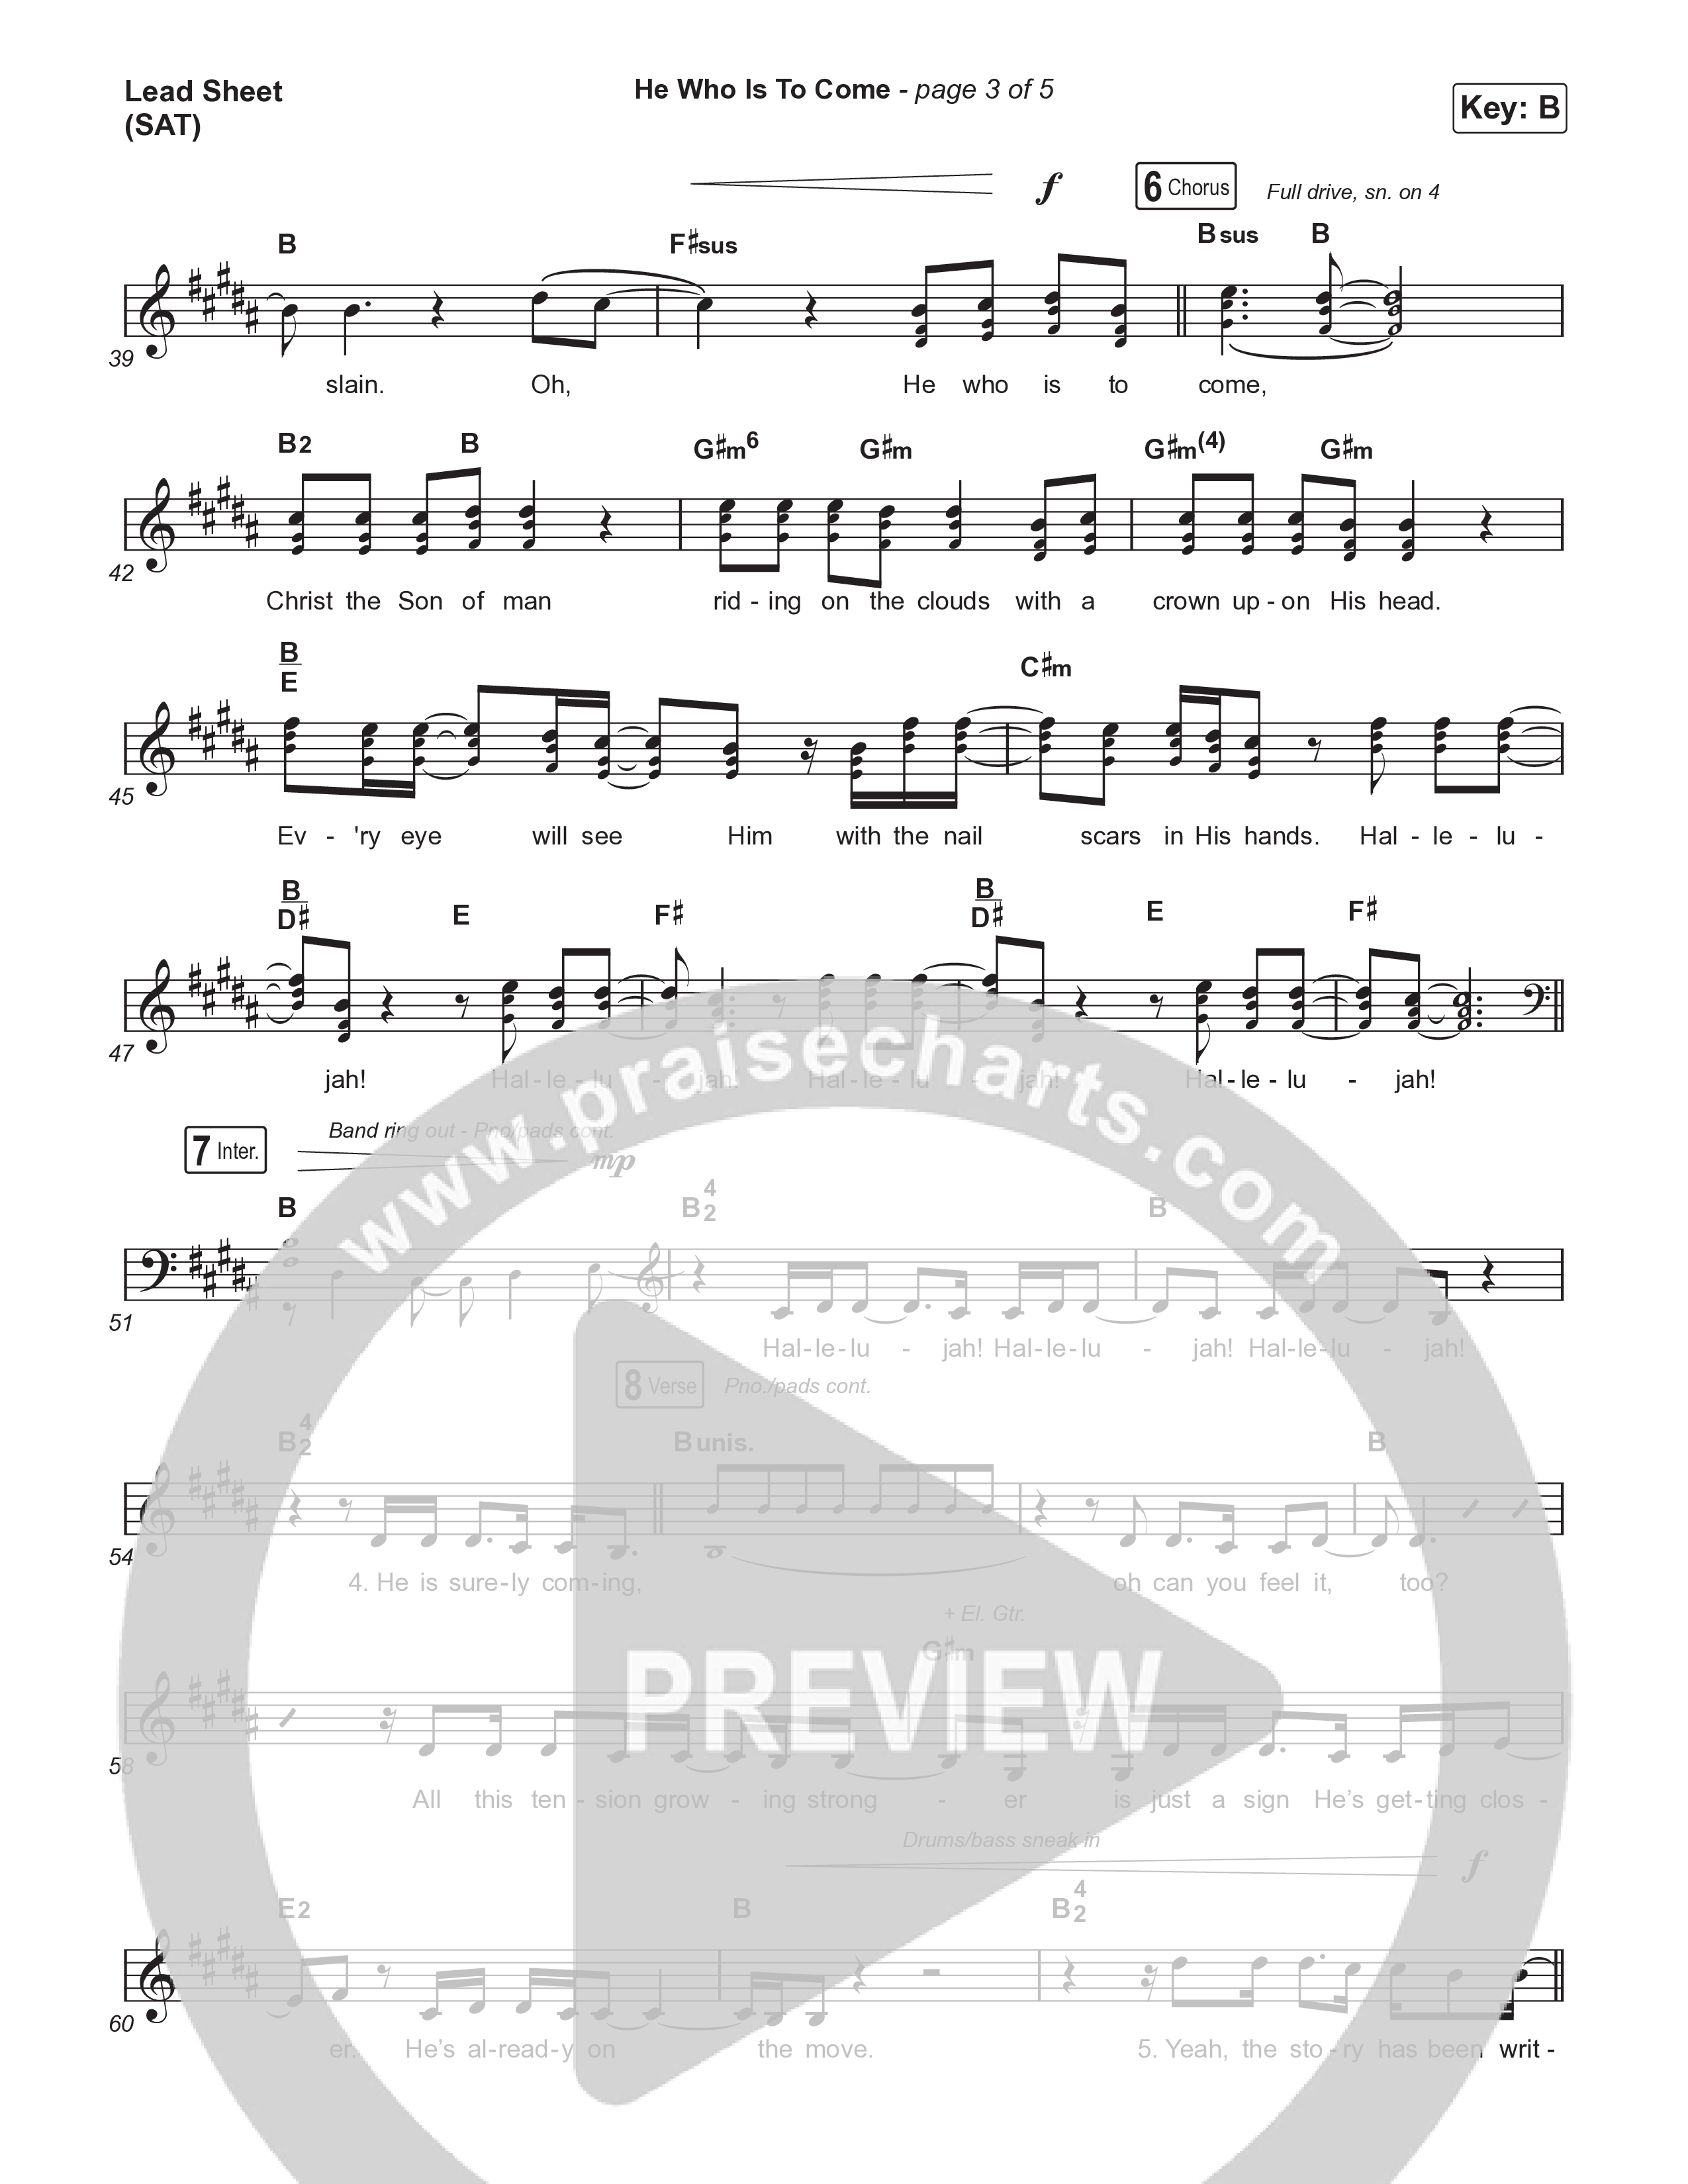 He Who Is To Come (Choral Anthem SATB) Lead Sheet (SAT) (Passion / Cody Carnes / Kristian Stanfill / Arr. Luke Gambill)